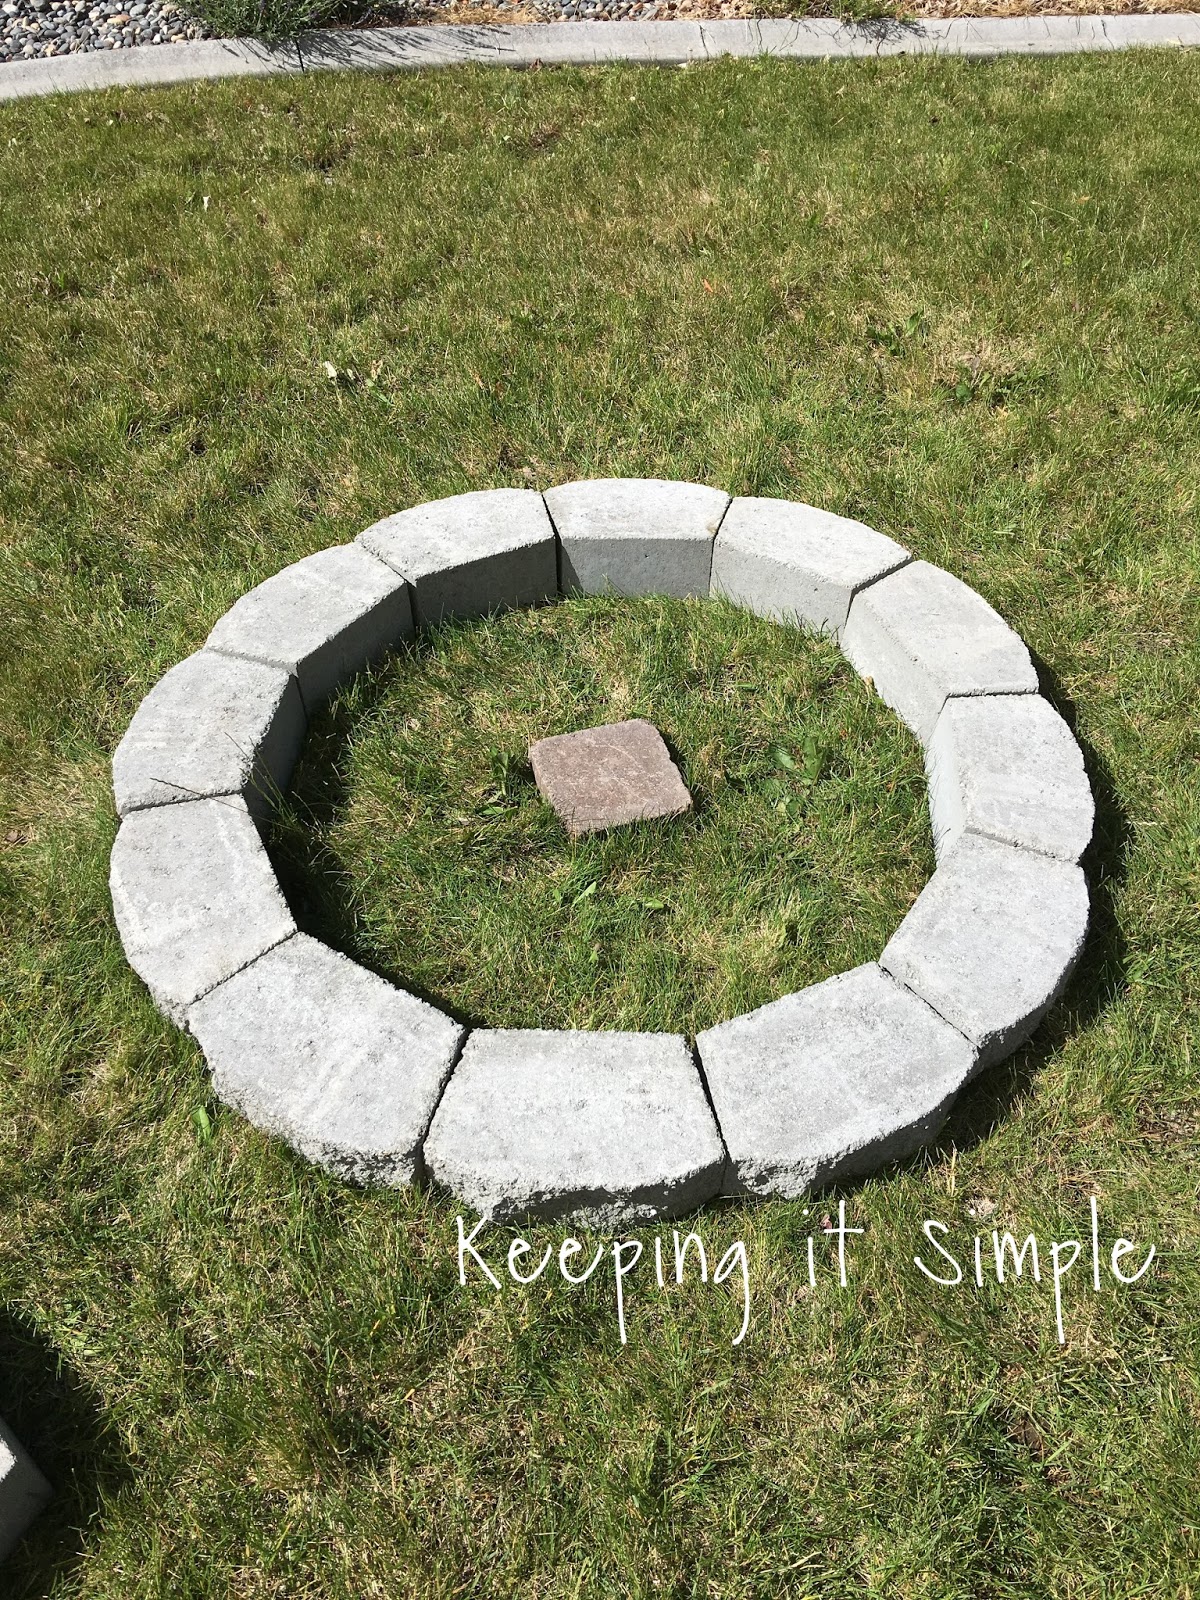 Build A Diy Fire Pit For Only 60, How To Build A Fire Pit With Brick Pavers